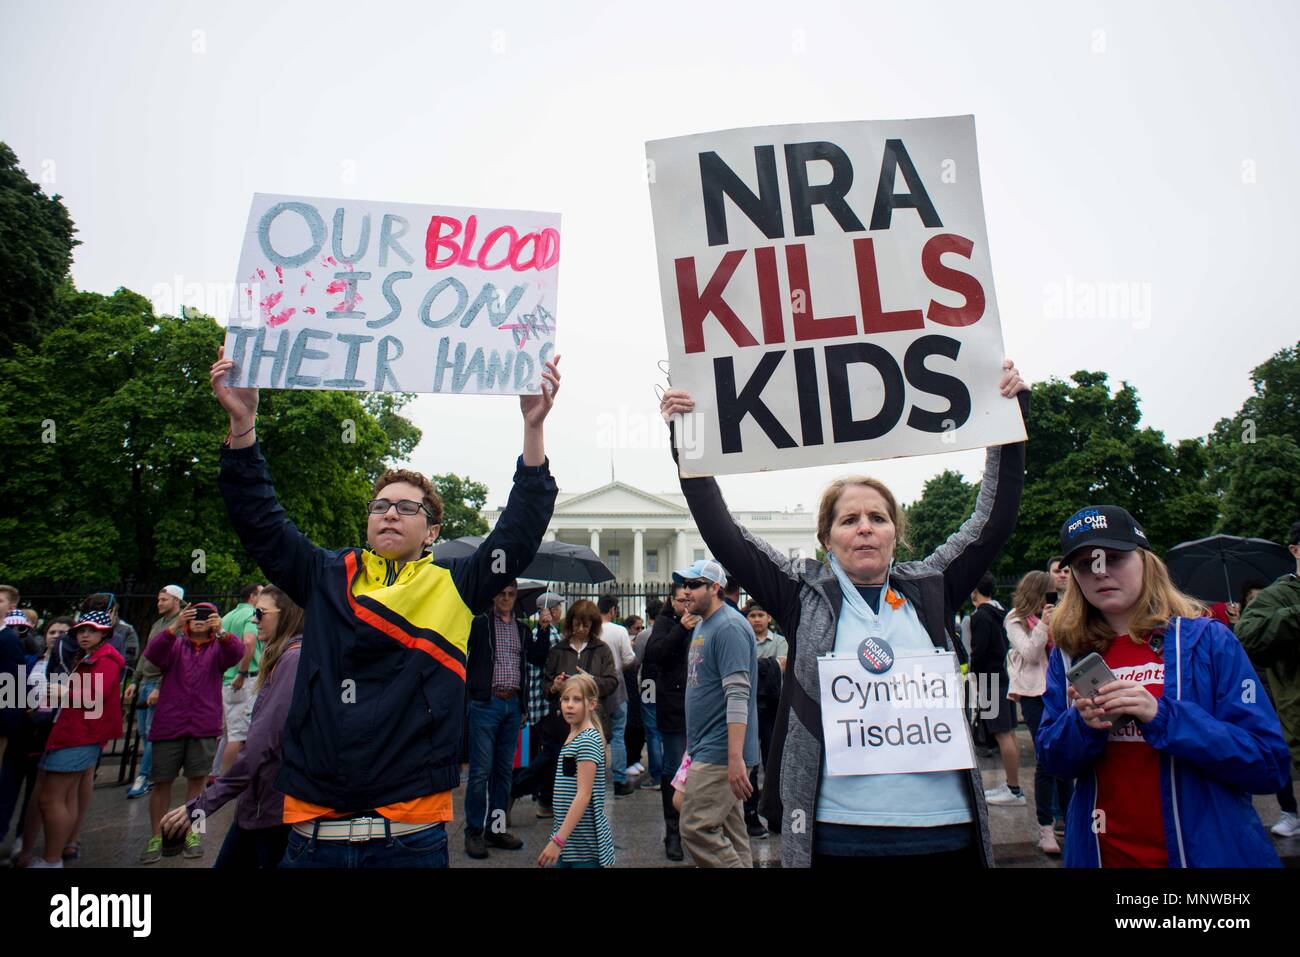 Washington, District of Columbia, USA. 19th May, 2018. Local high school students stage a ''lie-in'' in front of the White House to honor the victims of the Santa Fe High School shooting in Texas. The group is demanding the U.S. president and Congress work to pass gun control legislation. Credit: Erin Scott/ZUMA Wire/Alamy Live News Stock Photo